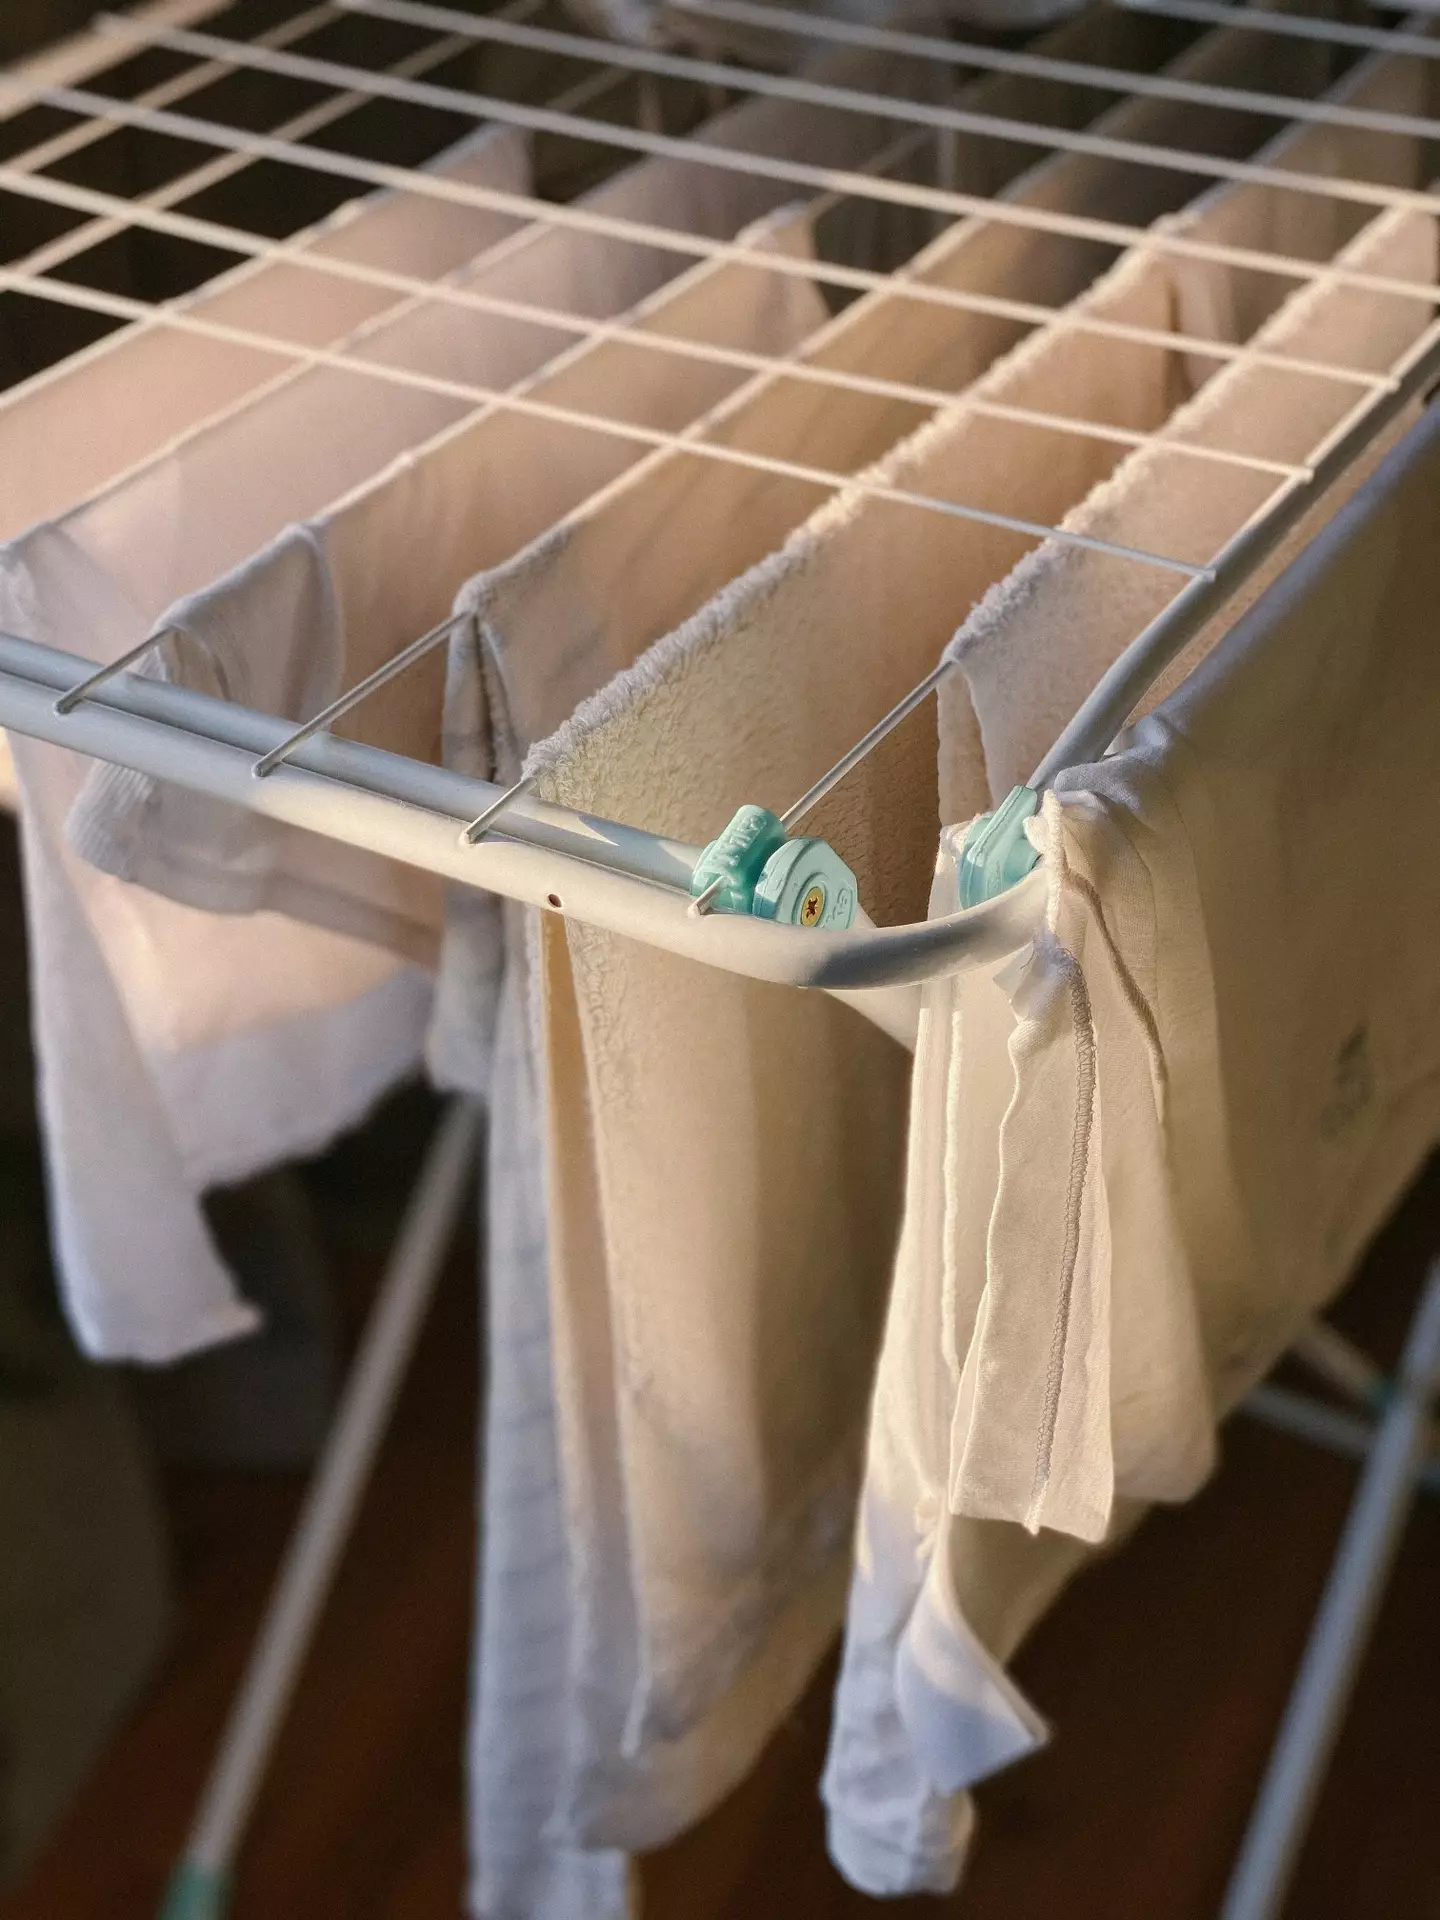 Experts say using an airer to dry your clothes is a better solution.